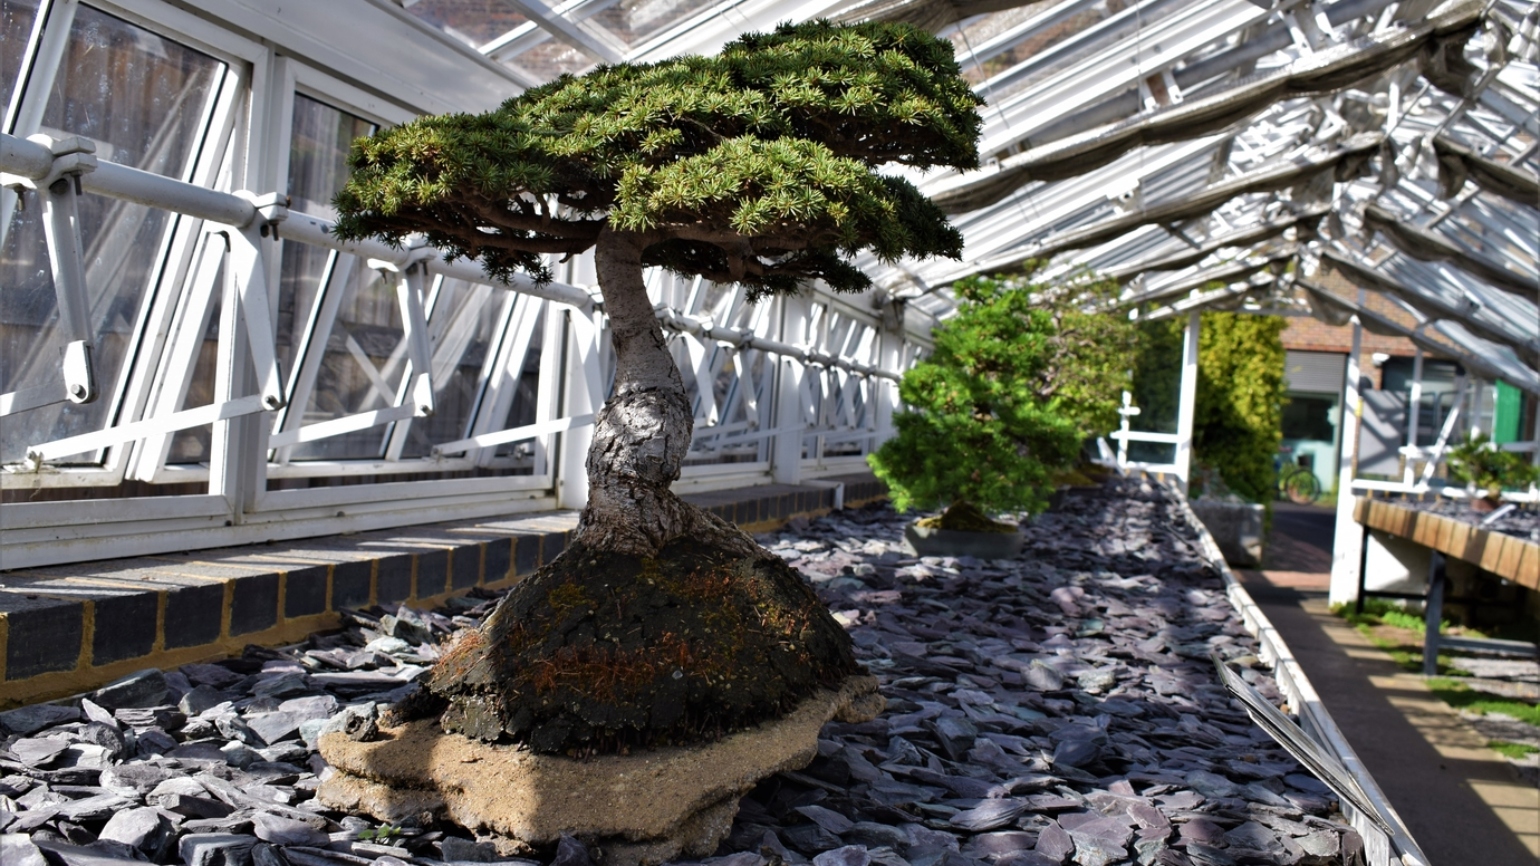 In pictures: The secrets of Kew's bonsai house | Kew